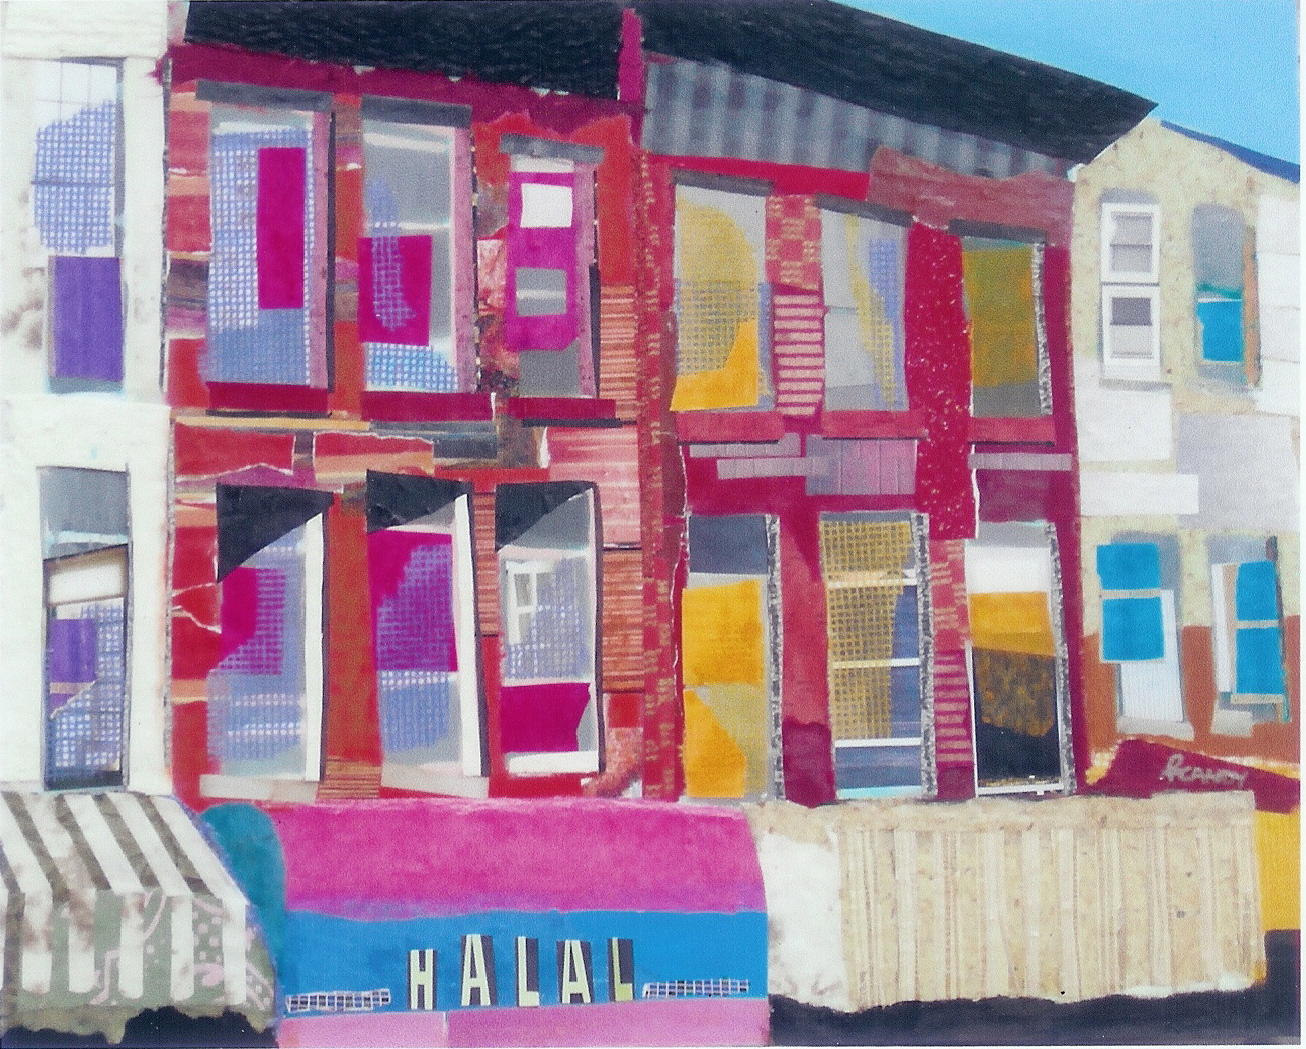 A painting of a building with many windows